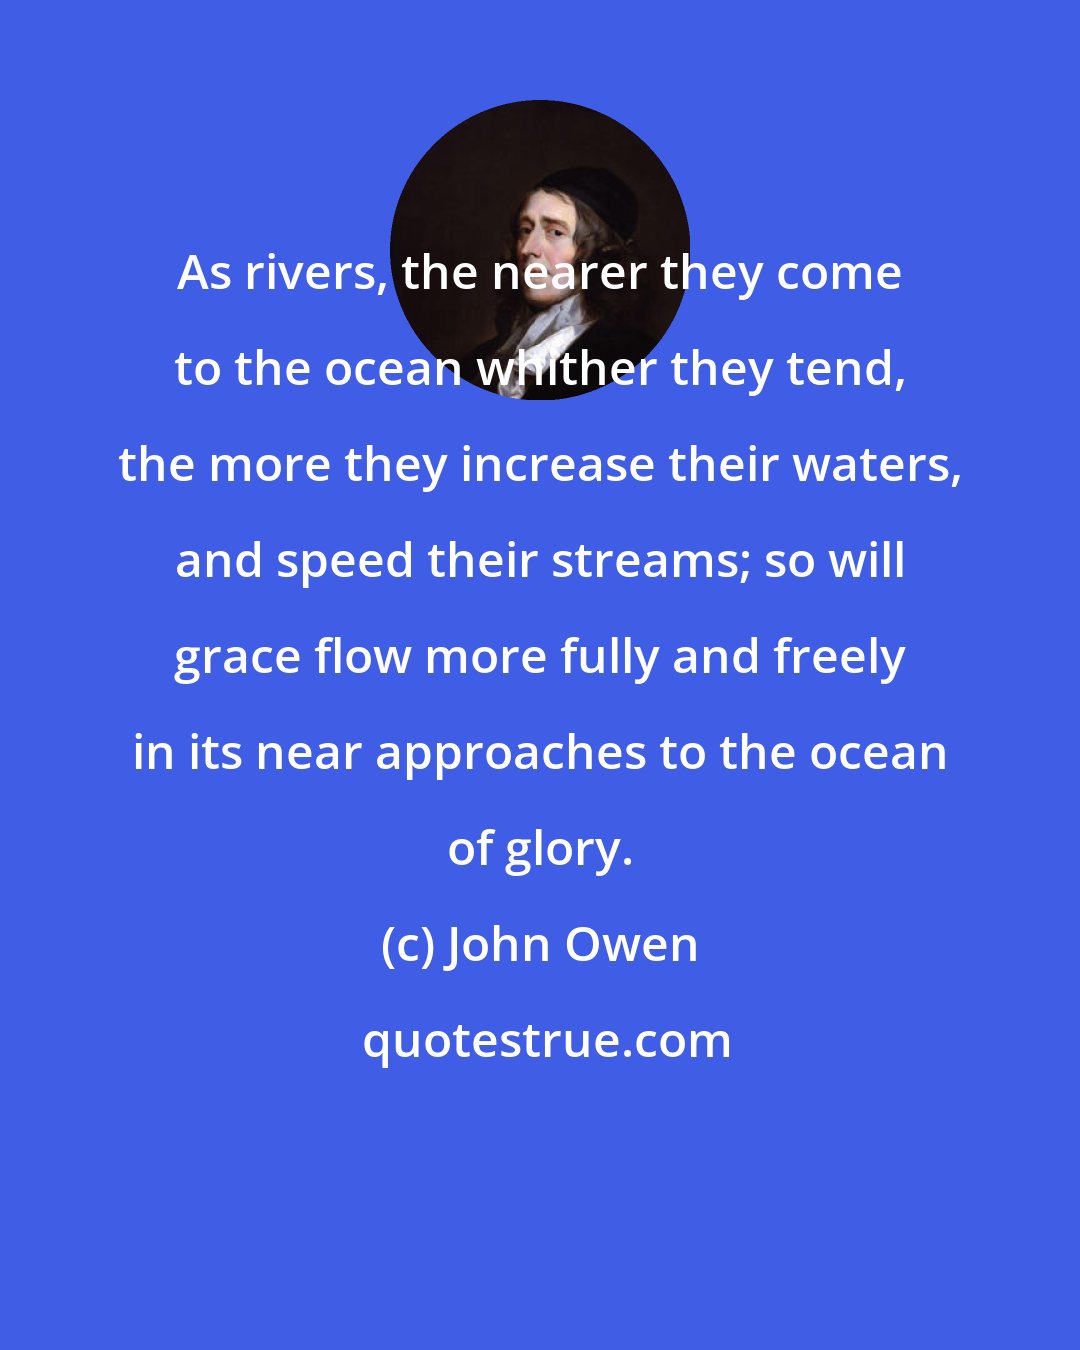 John Owen: As rivers, the nearer they come to the ocean whither they tend, the more they increase their waters, and speed their streams; so will grace flow more fully and freely in its near approaches to the ocean of glory.